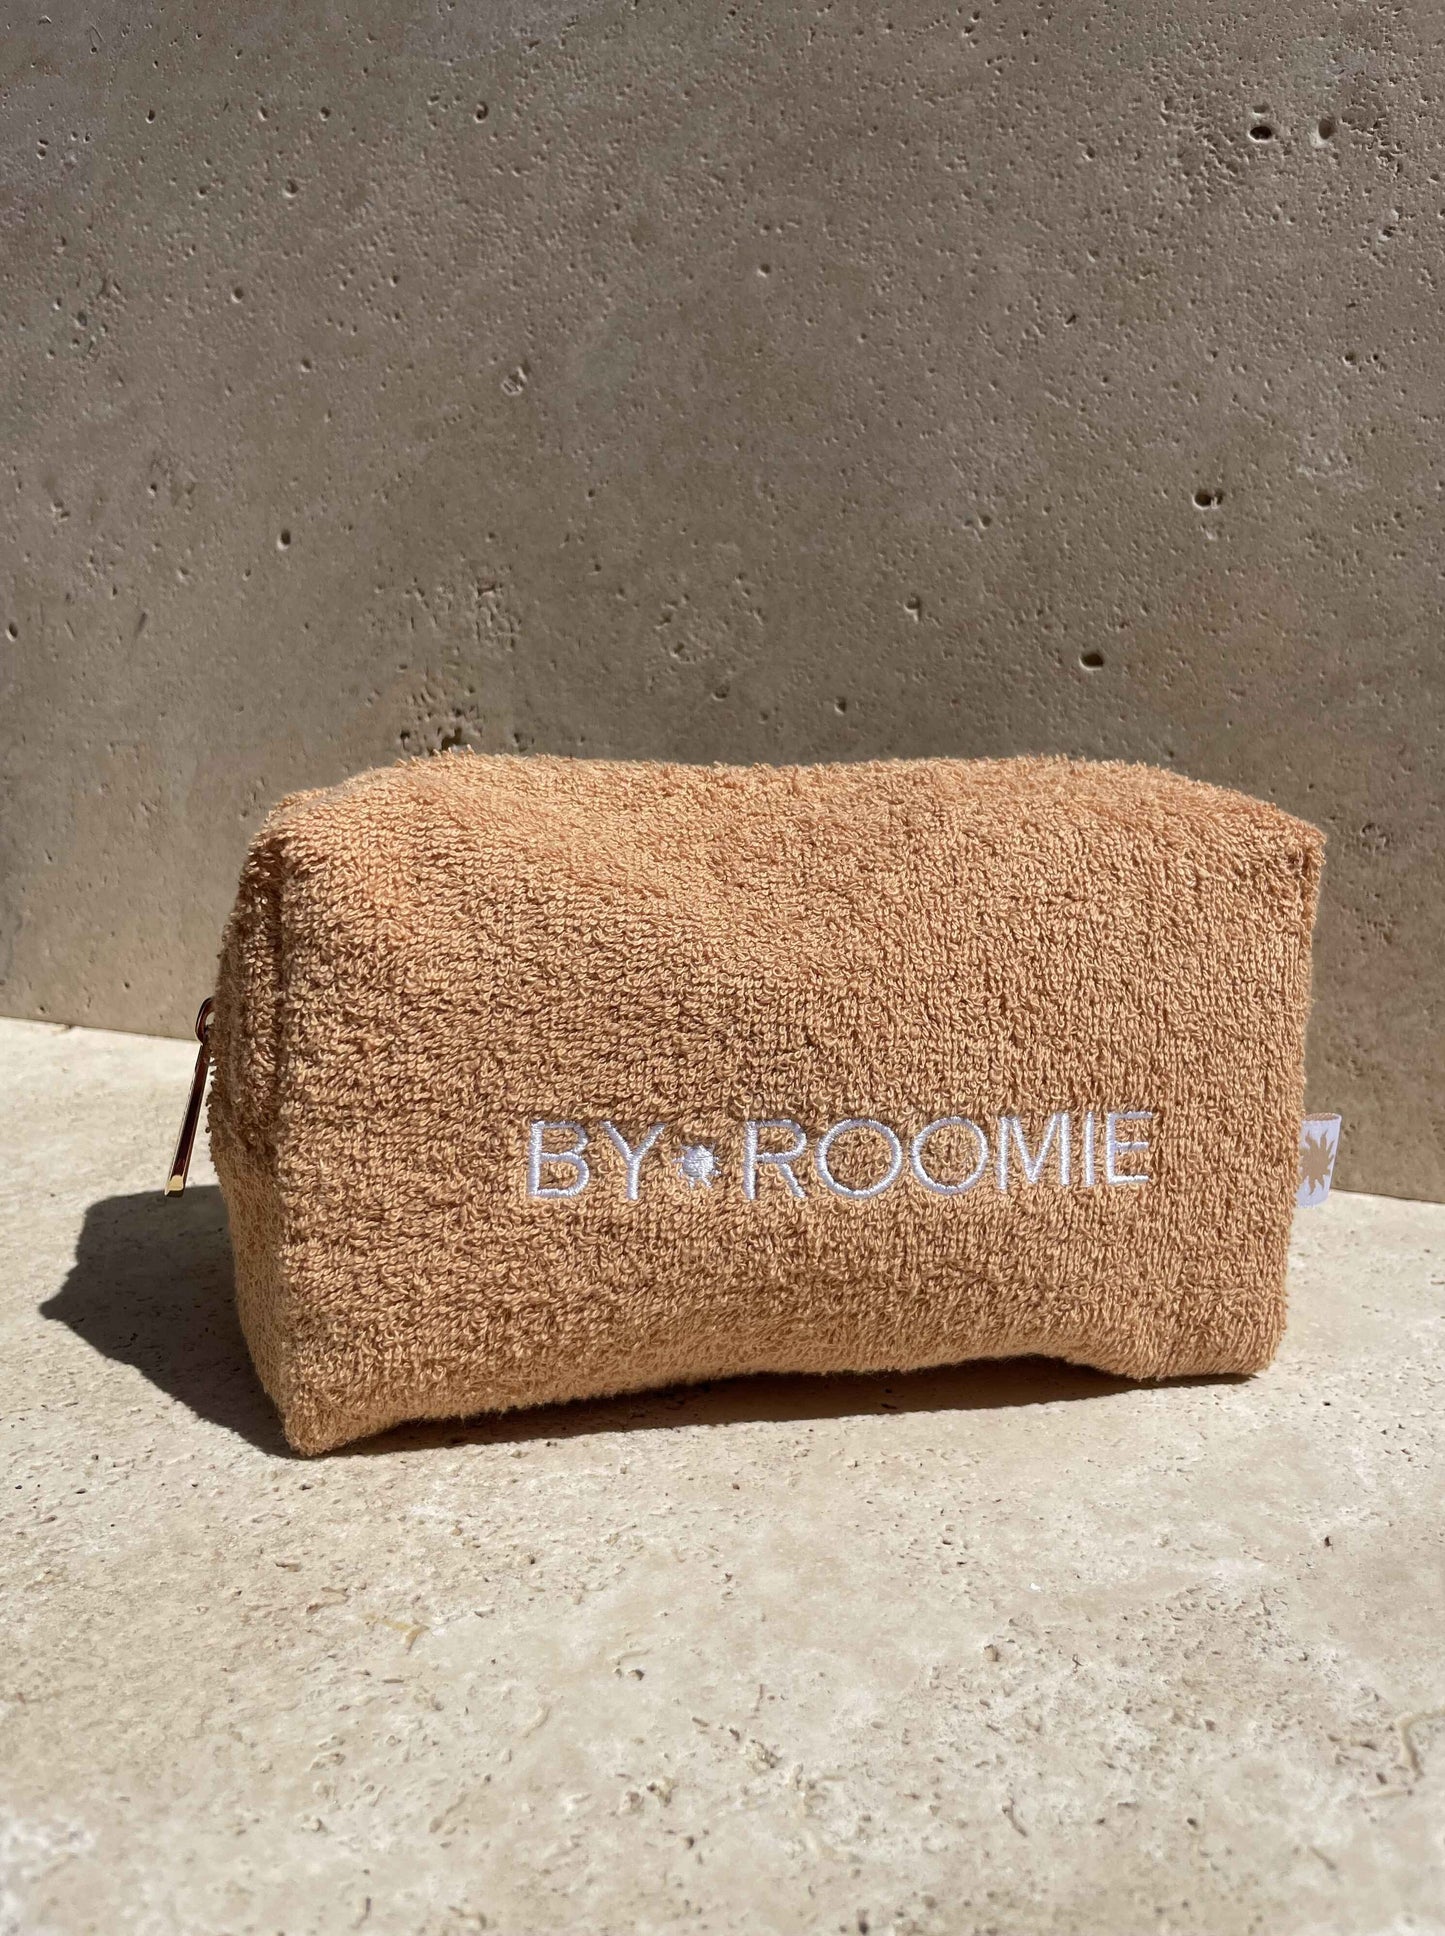 By Roomie Lael Beauty Bag